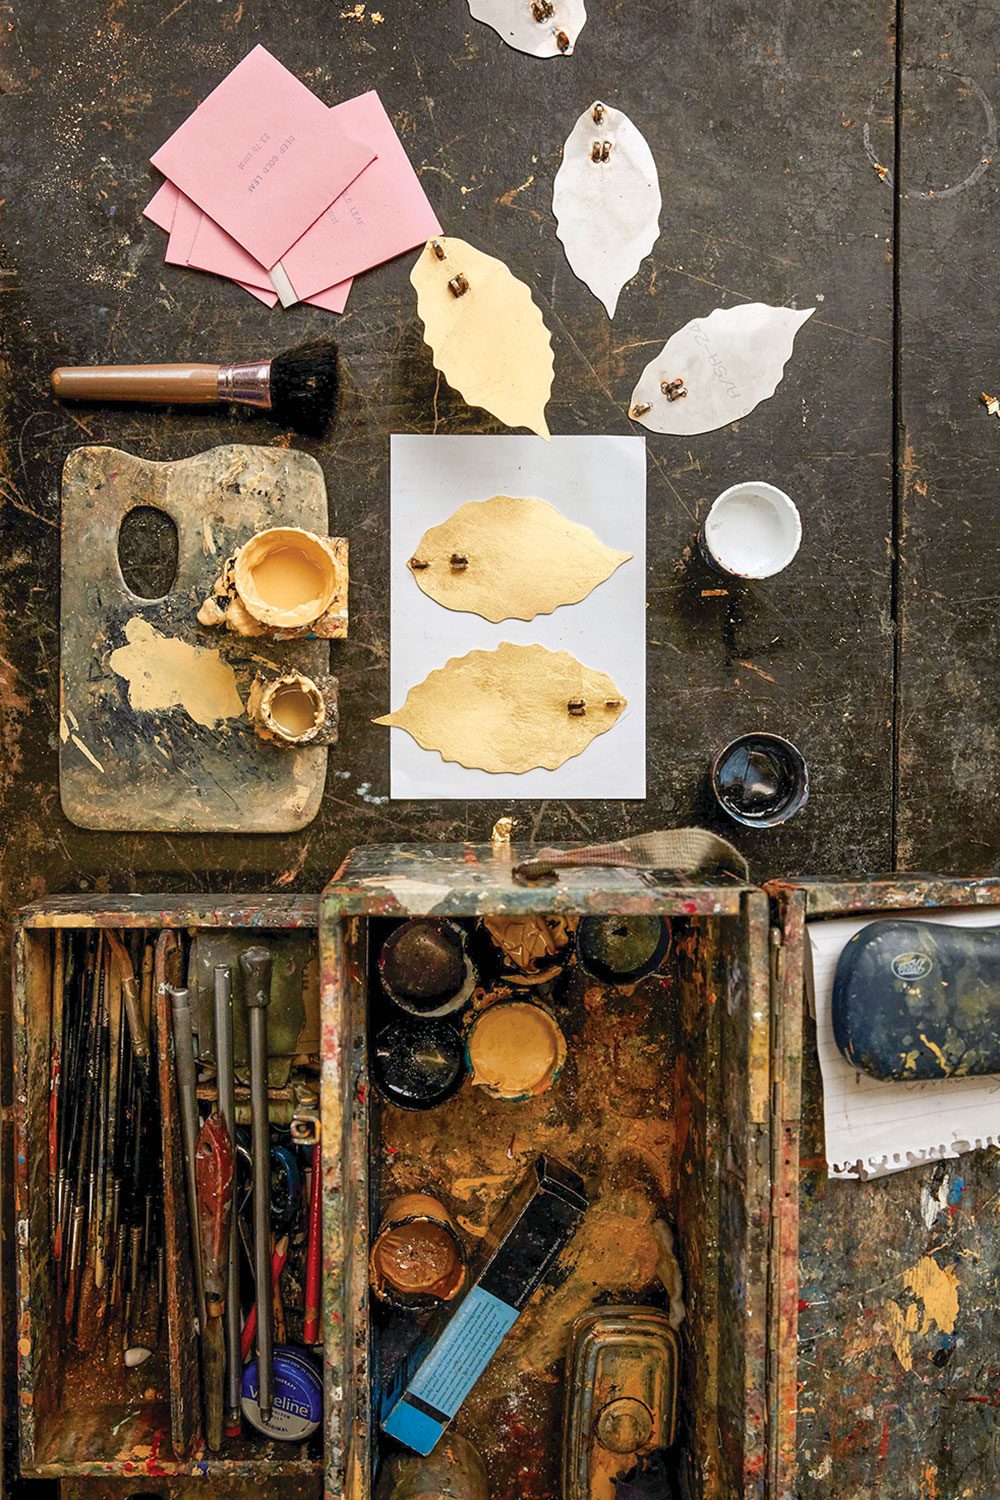 leaf cutouts and artist tools, including a palette, brushes and cups of paint